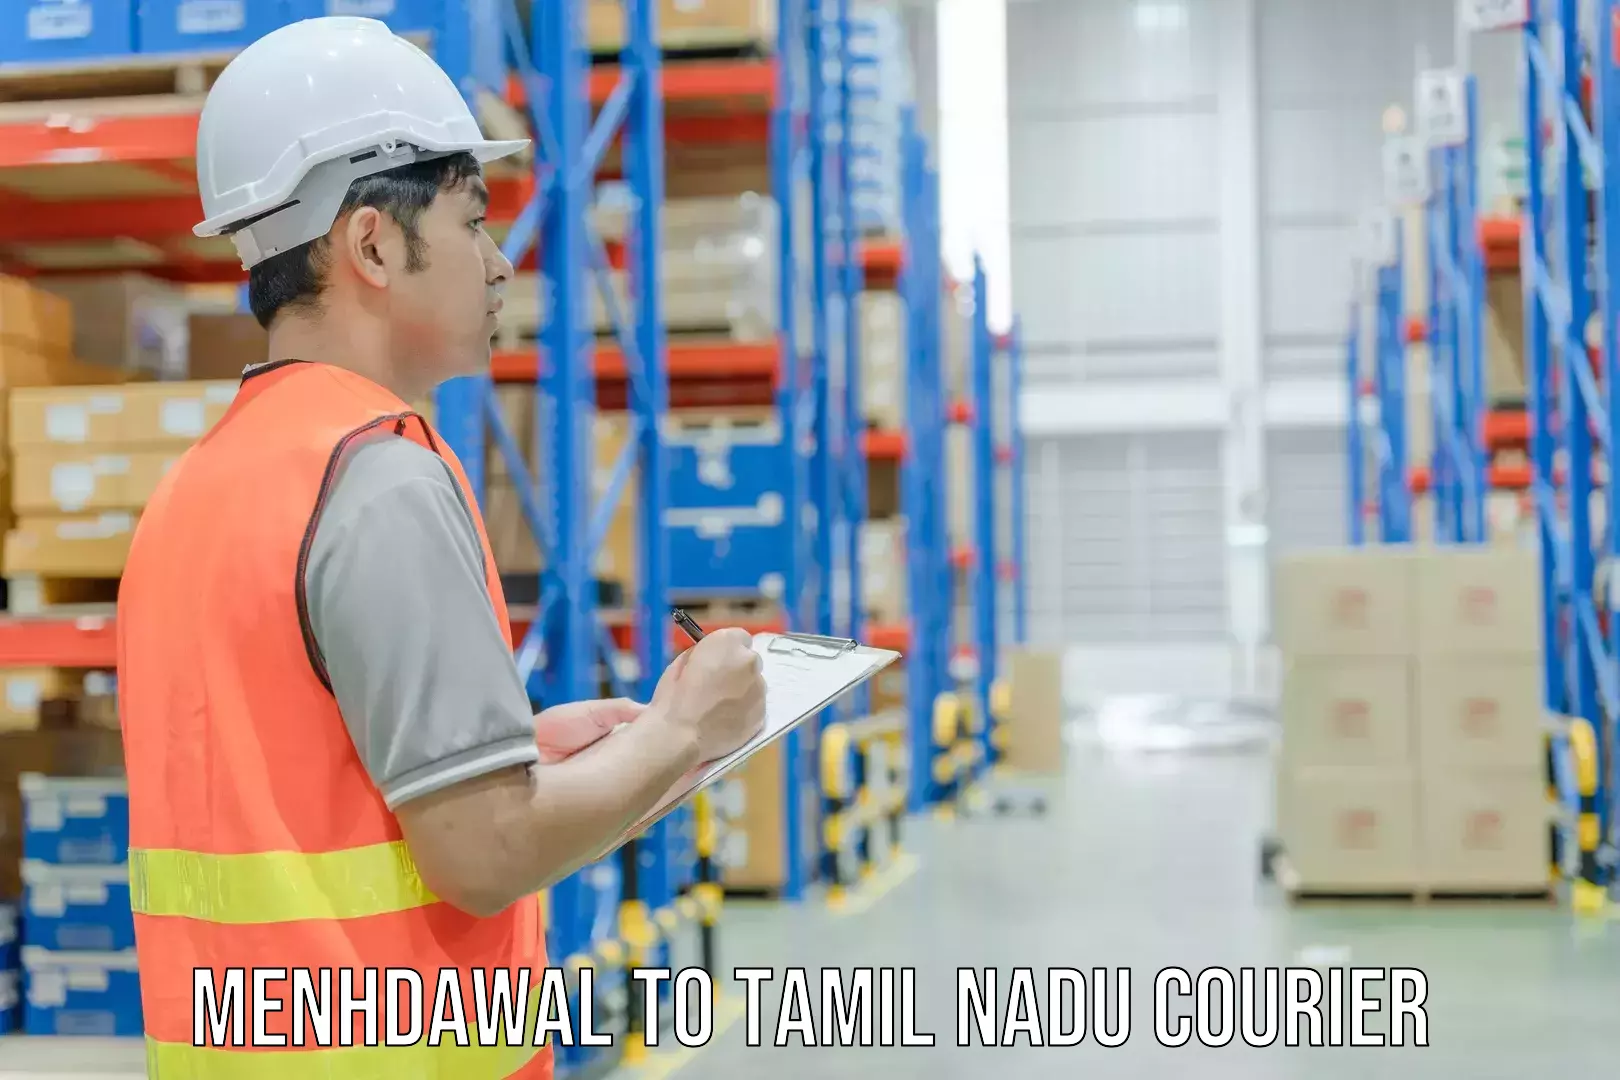 Flexible delivery scheduling Menhdawal to Tamil Nadu